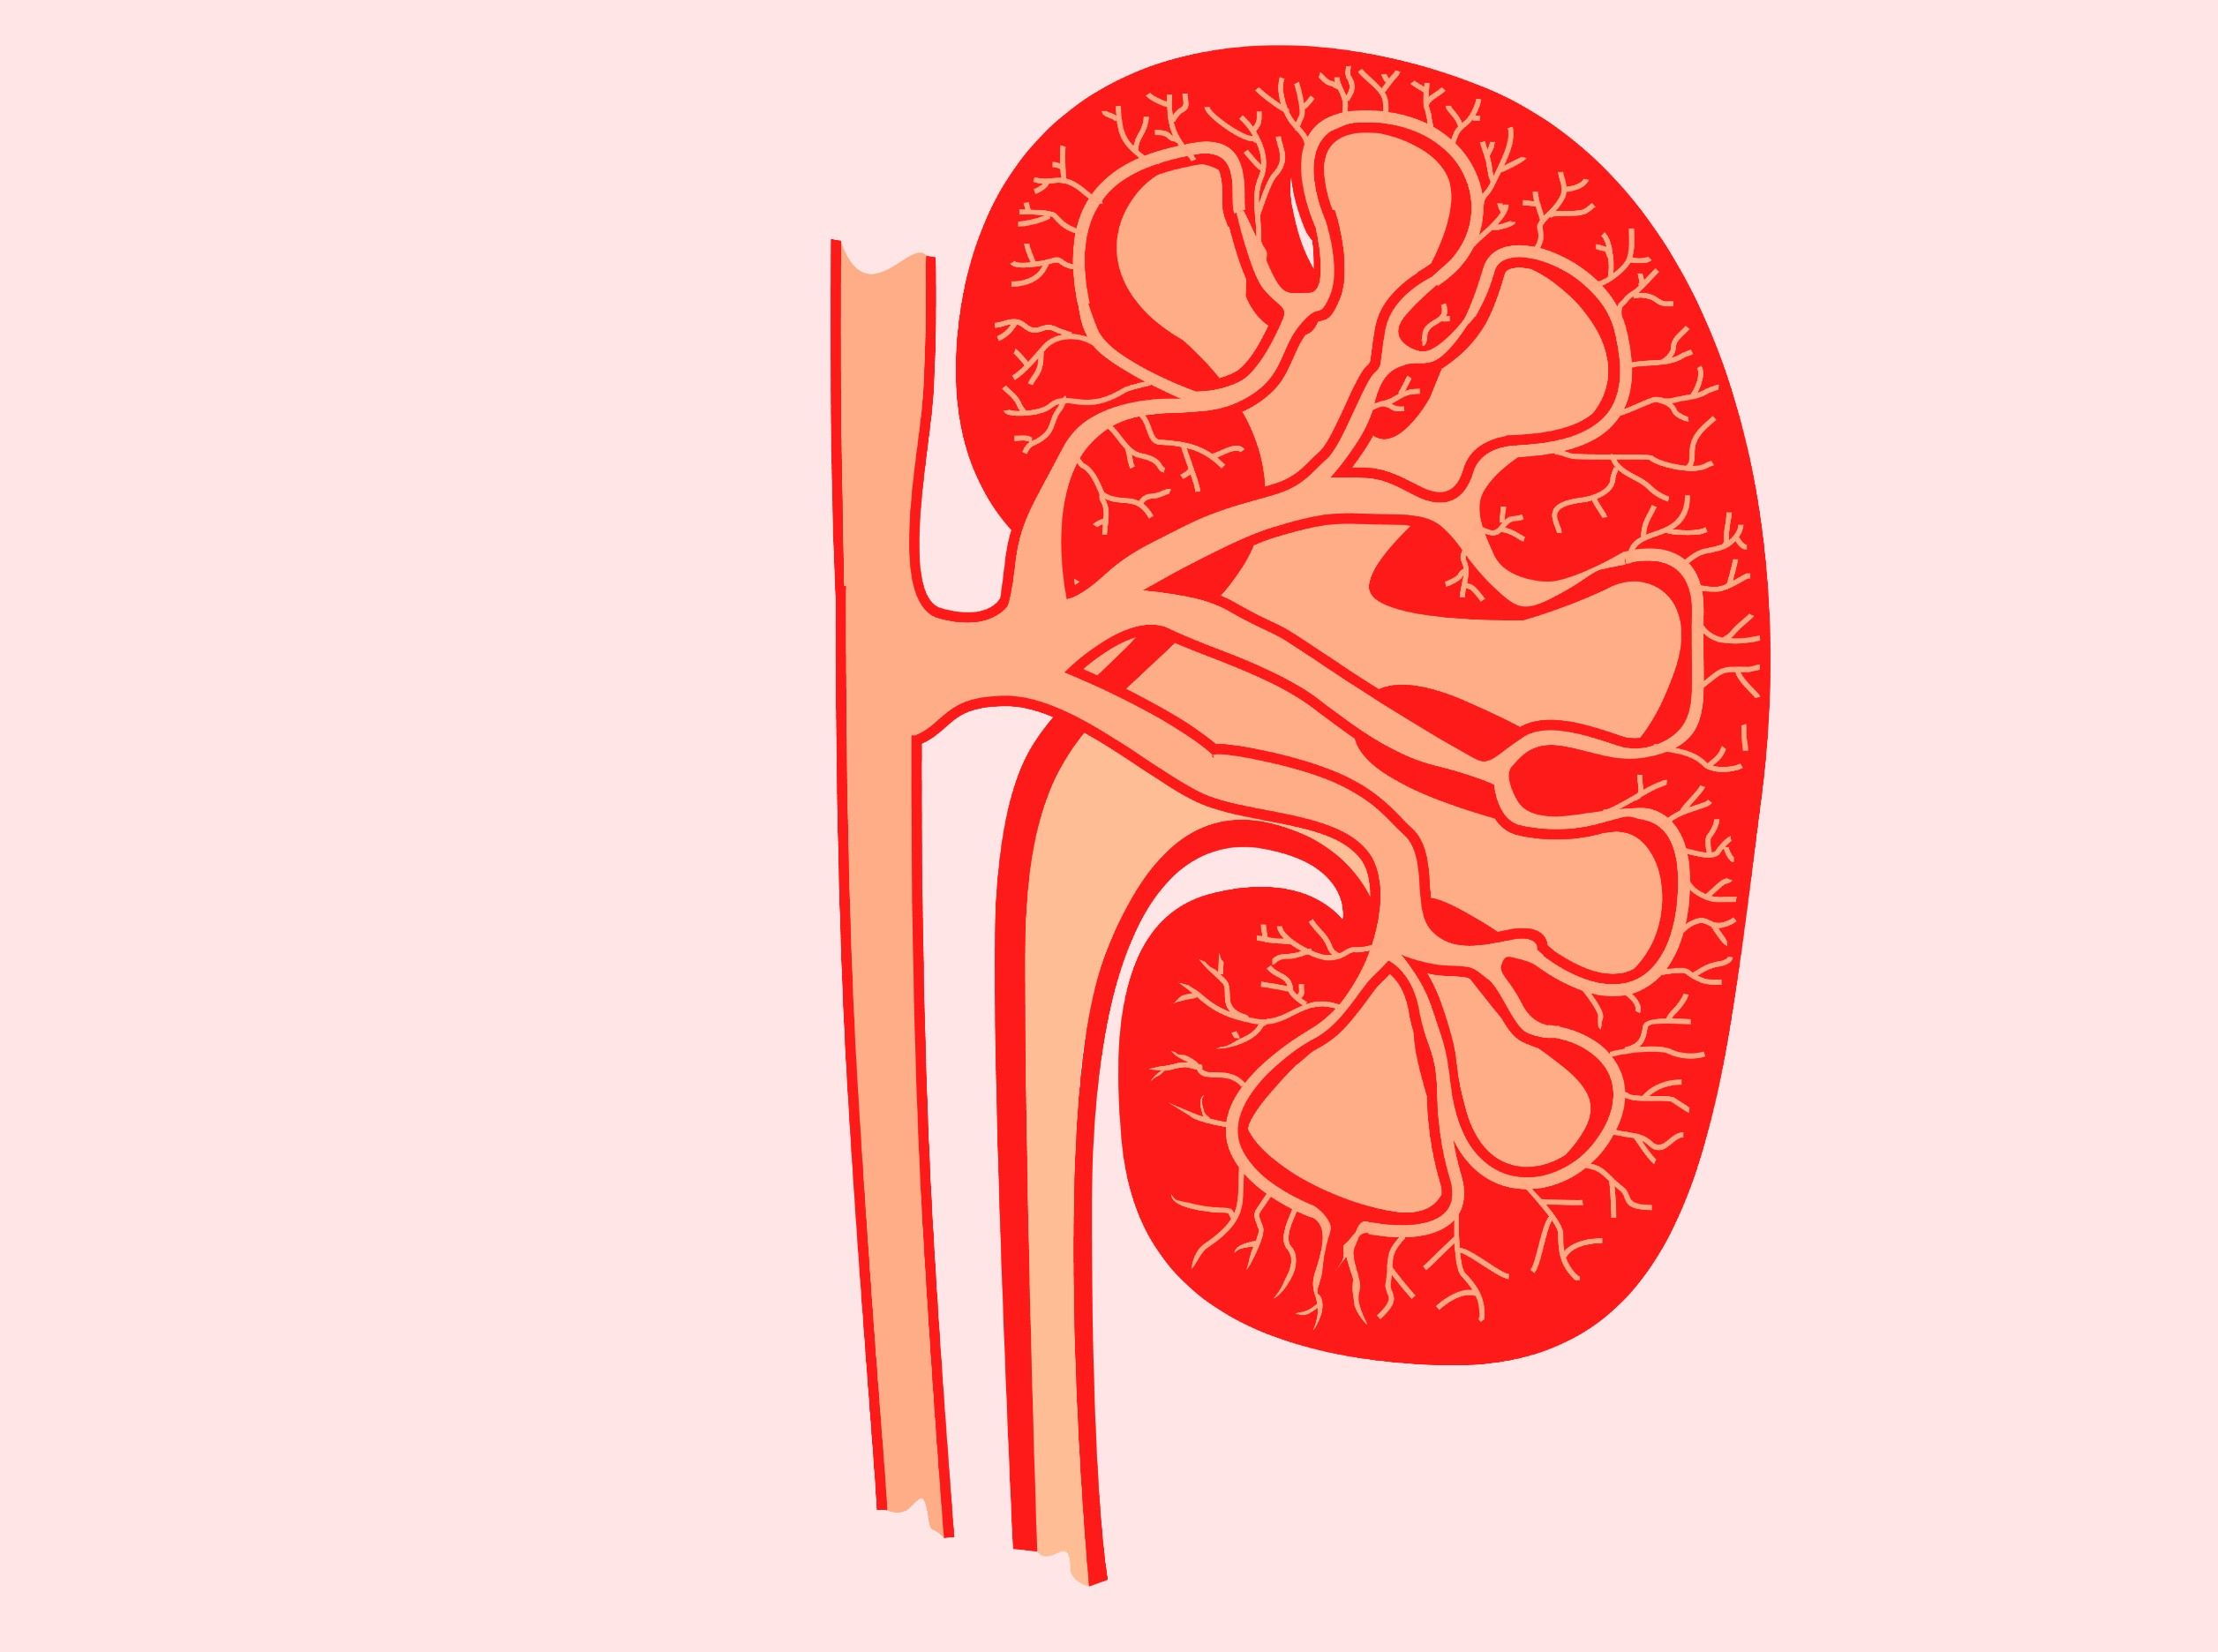 A test may help medical professionals better gauge who is at risk of kidney failure or even death.